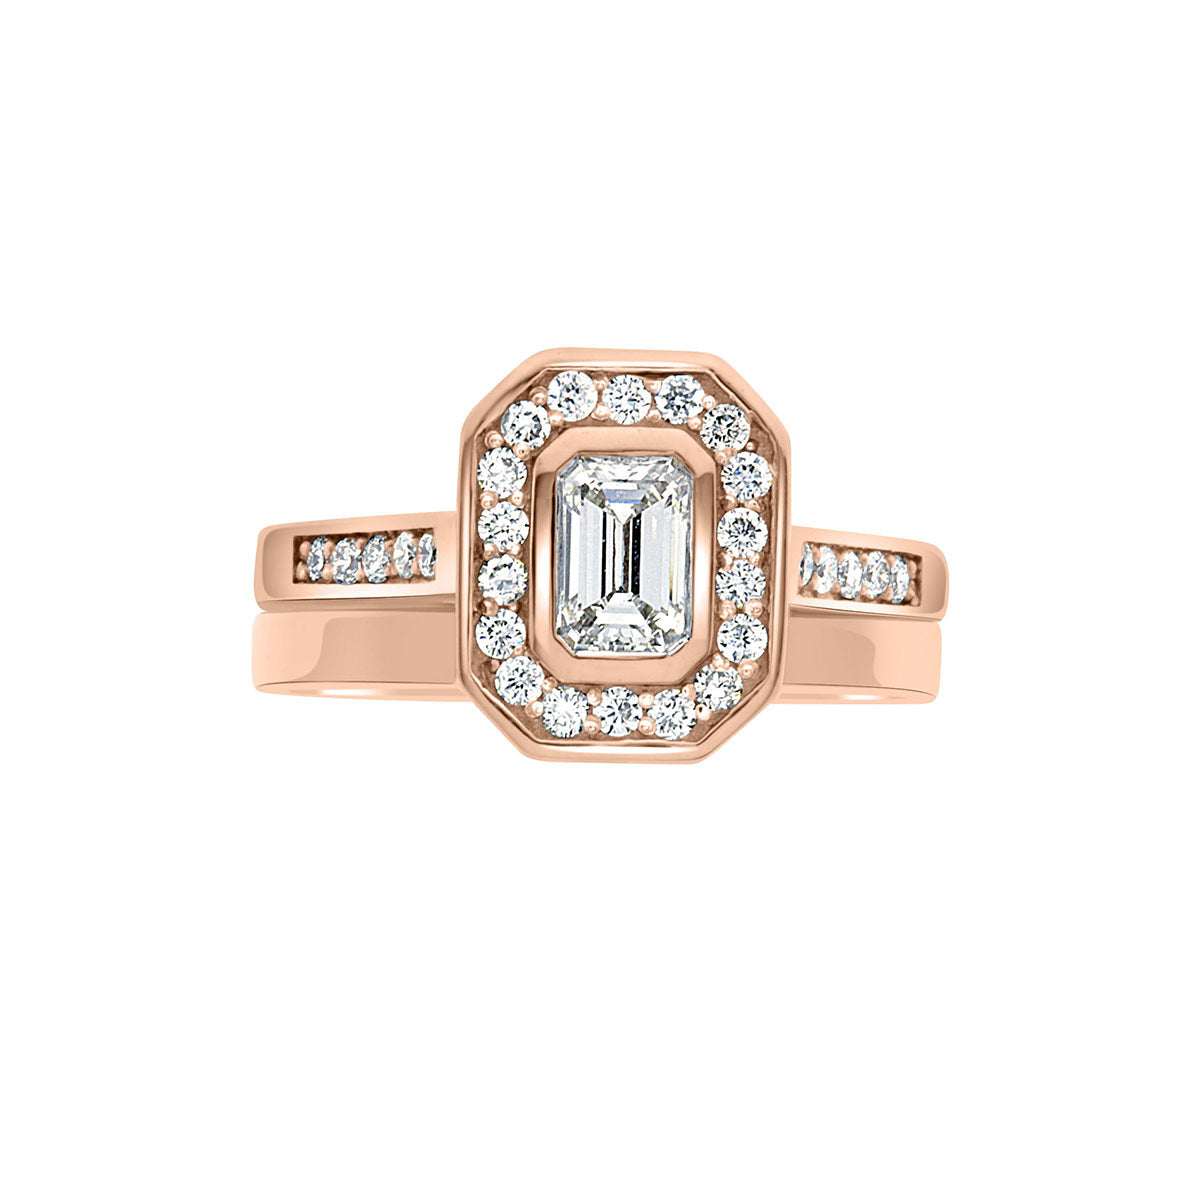 Emerald Cut Halo Ring in rose gold with a matching plain wedding ring